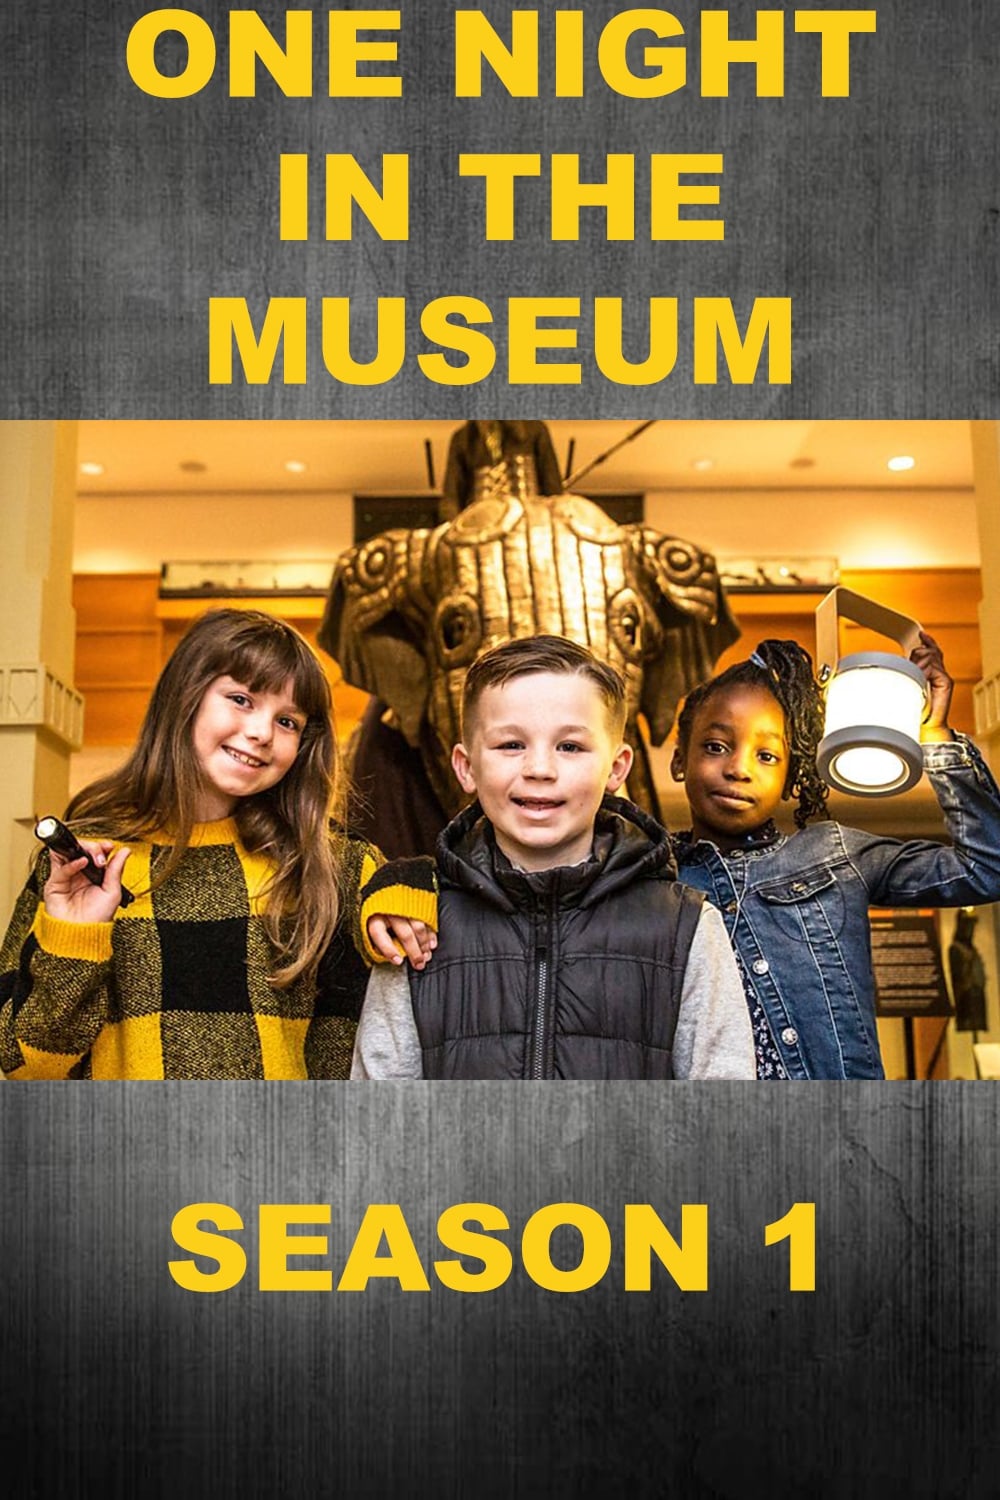 One Night in the Museum